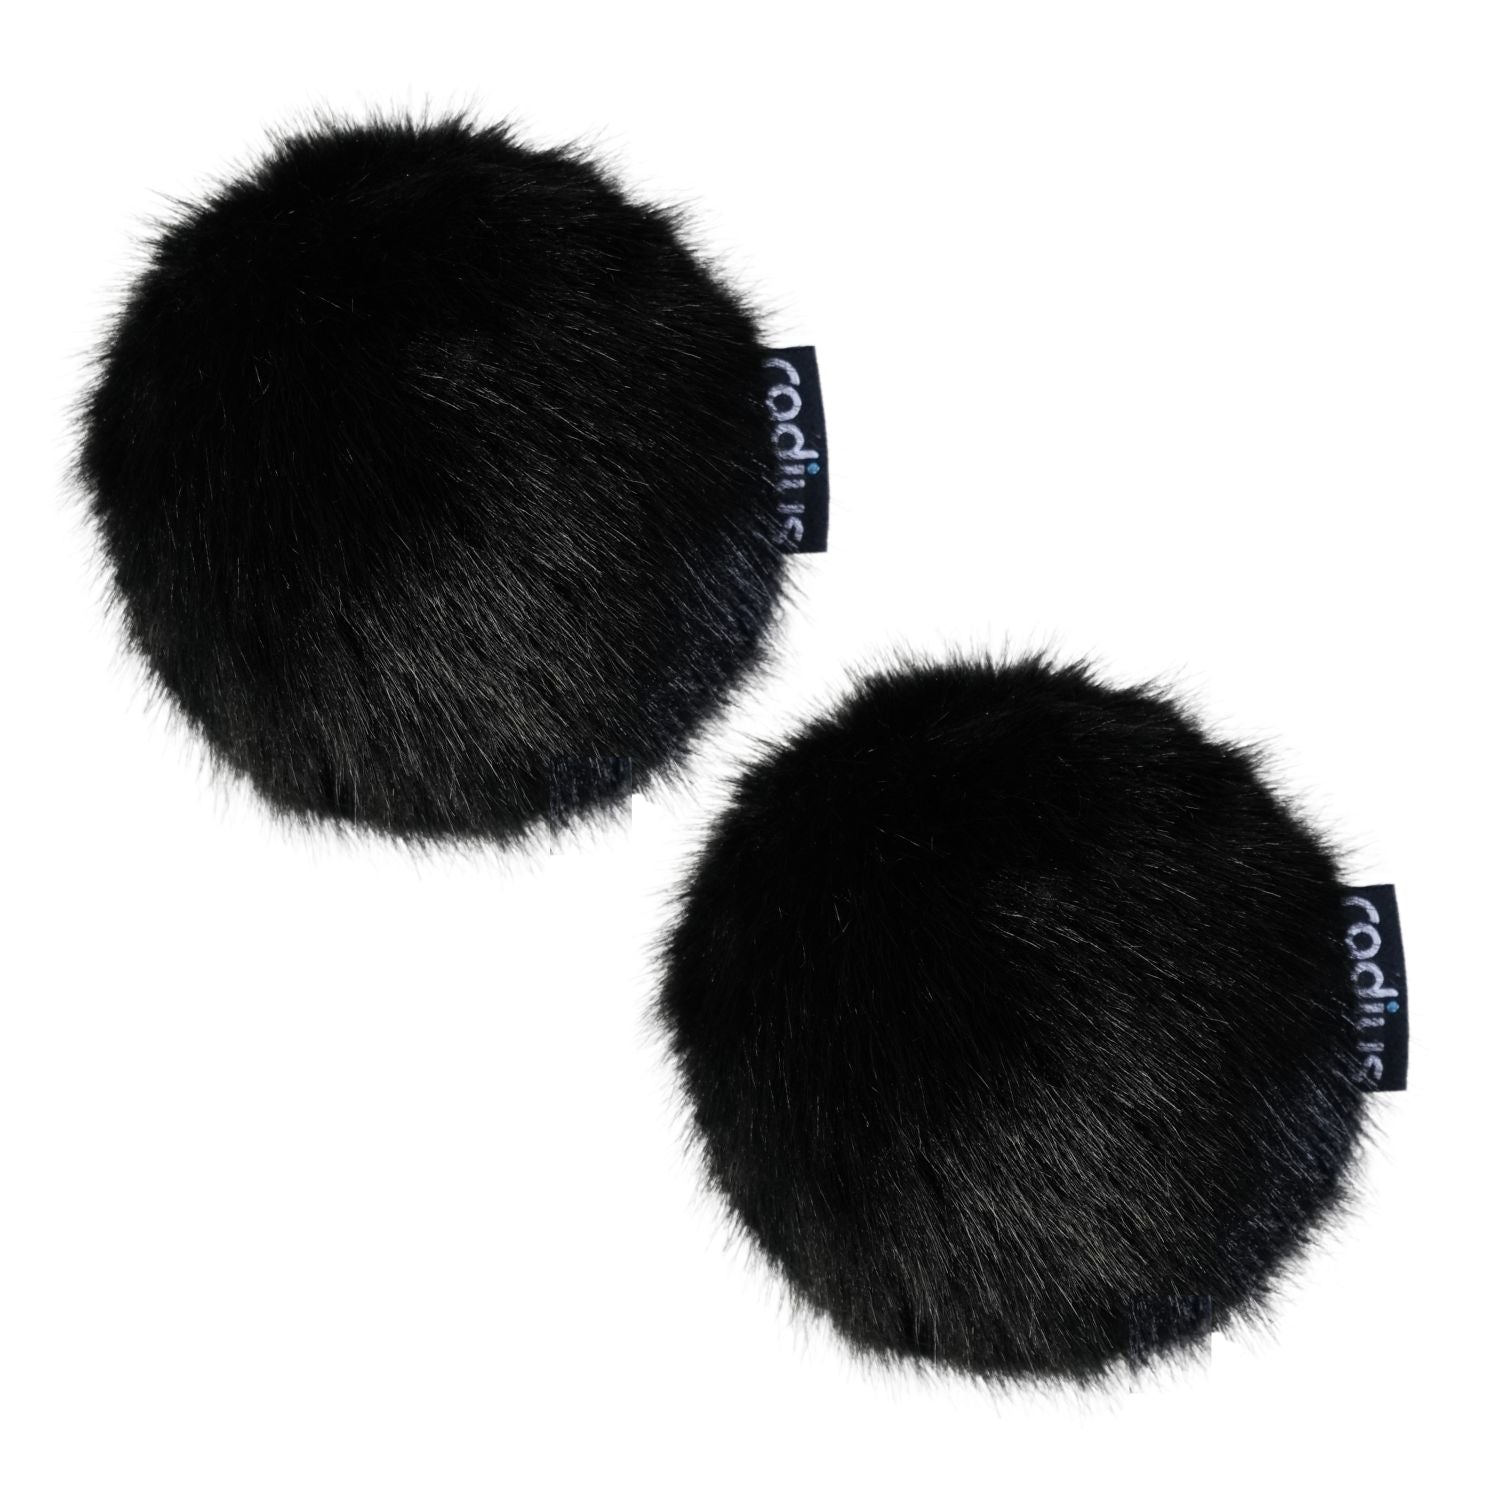 Replacement Windcover for Rycote BBG, Pair, Black Fur